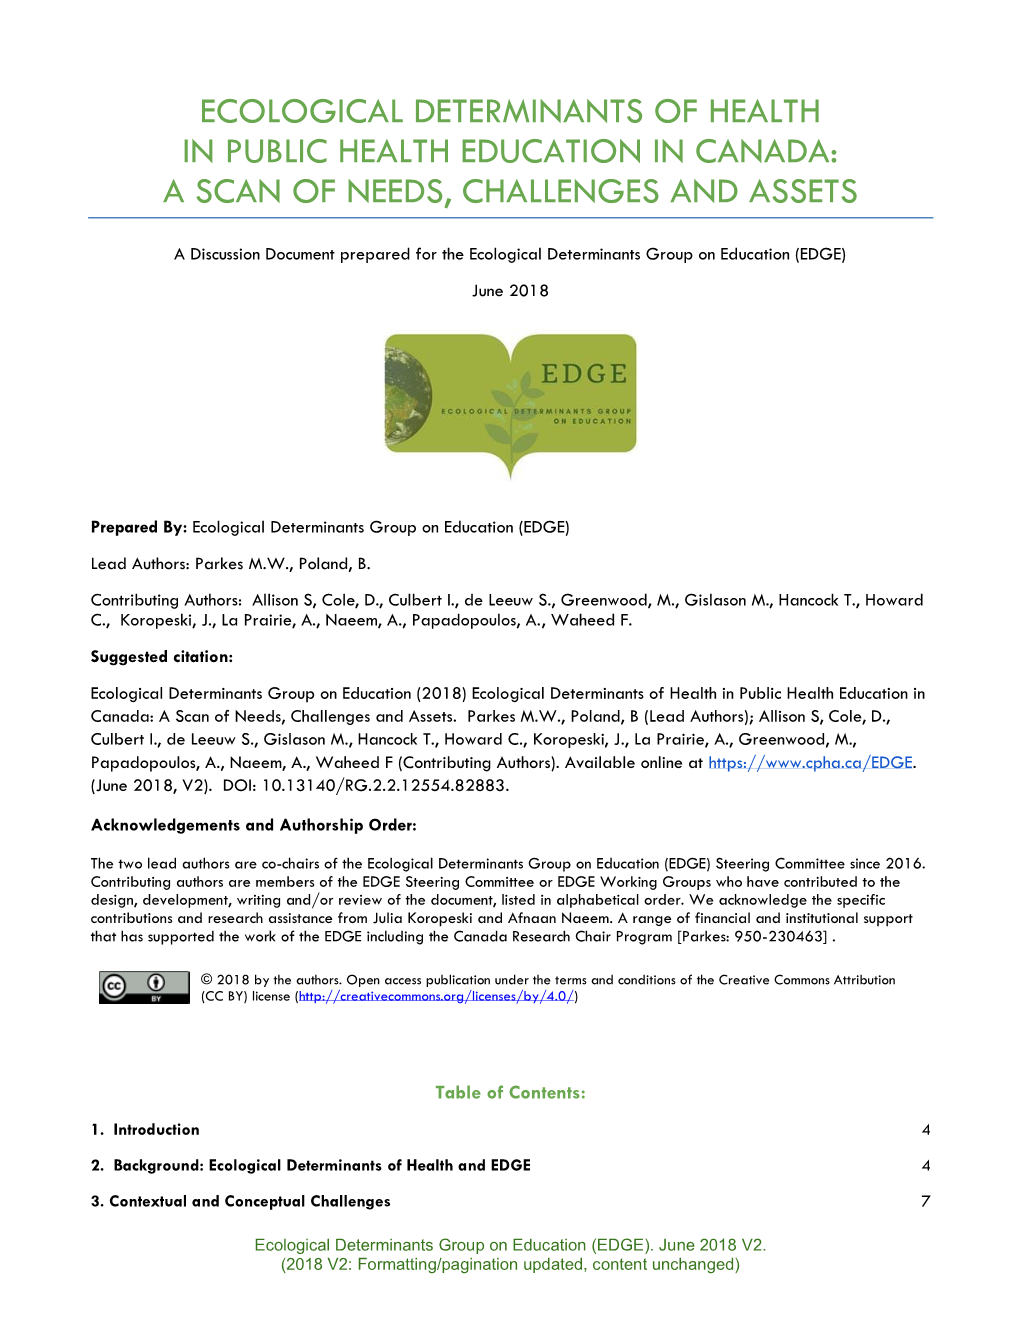 Ecological Determinants of Health in Public Health Education in Canada: a Scan of Needs, Challenges and Assets